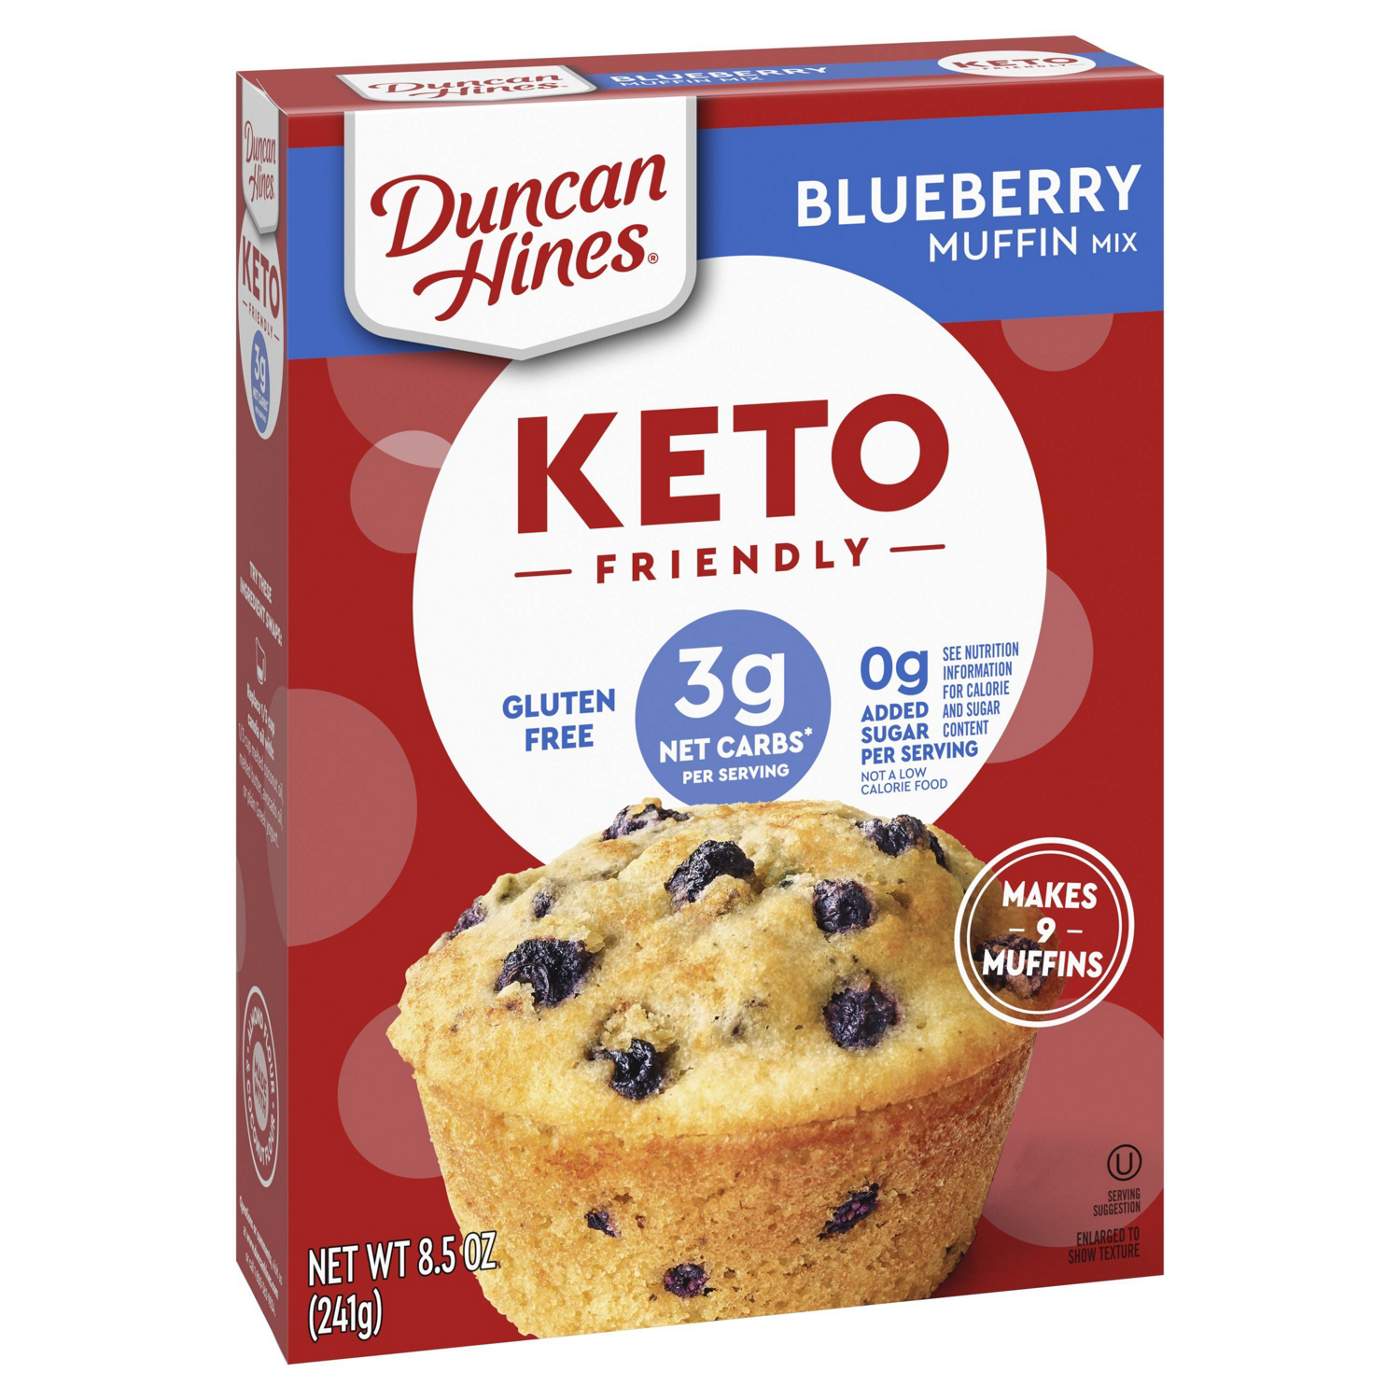 Duncan Hines Keto Friendly Blueberry Muffin Mix; image 4 of 5